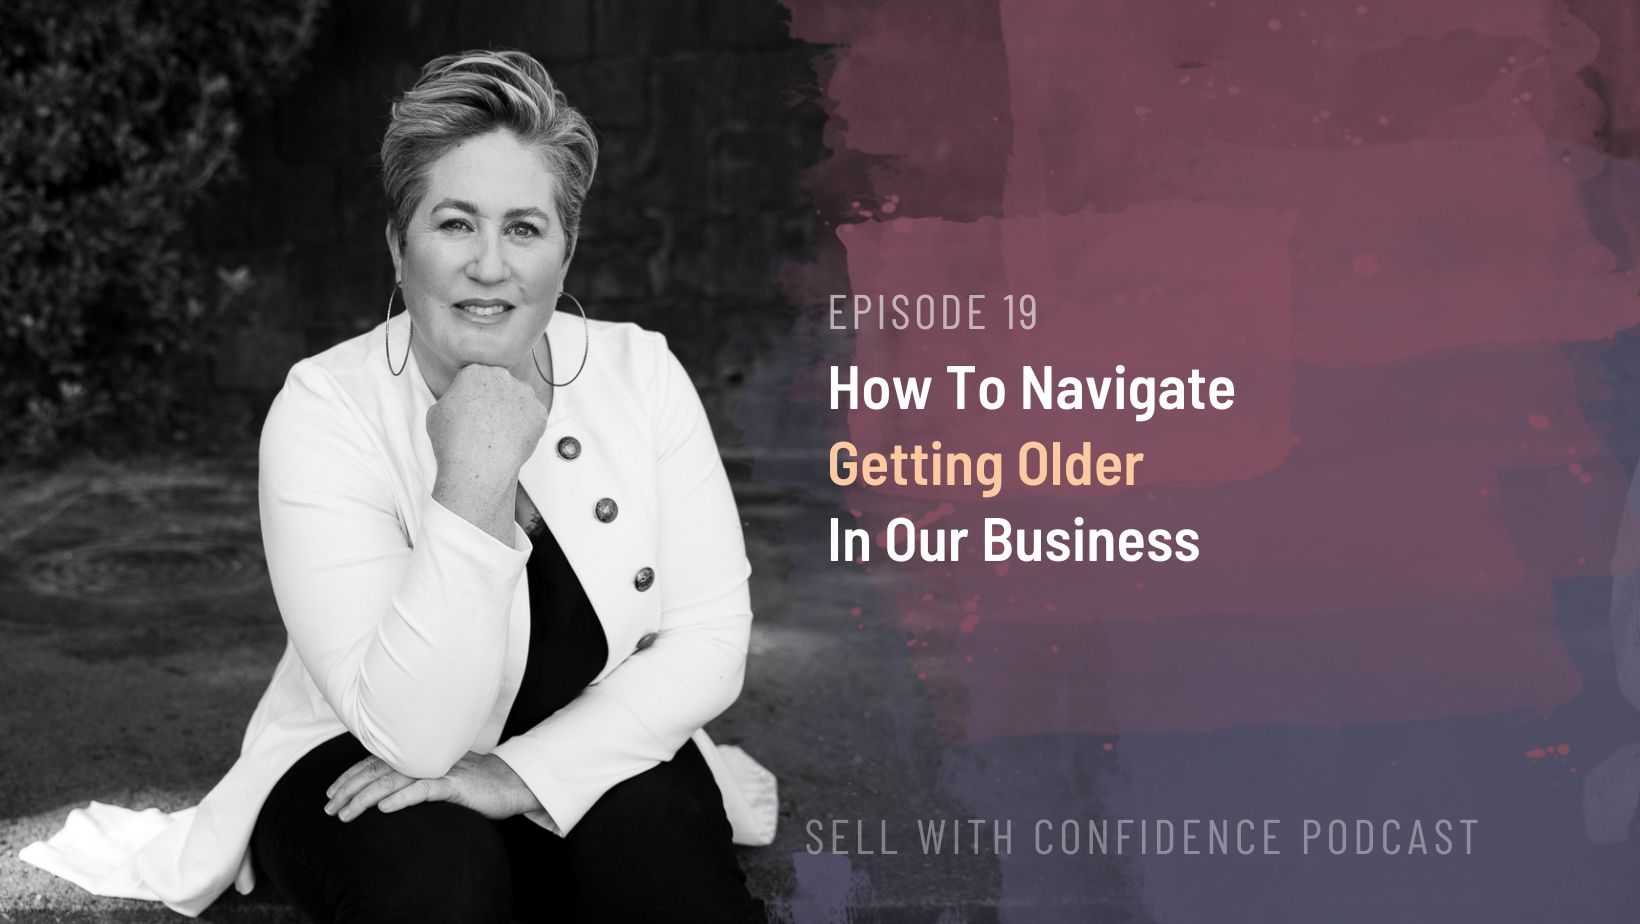 How to navigate getting older in business - Natalie Tolhopf